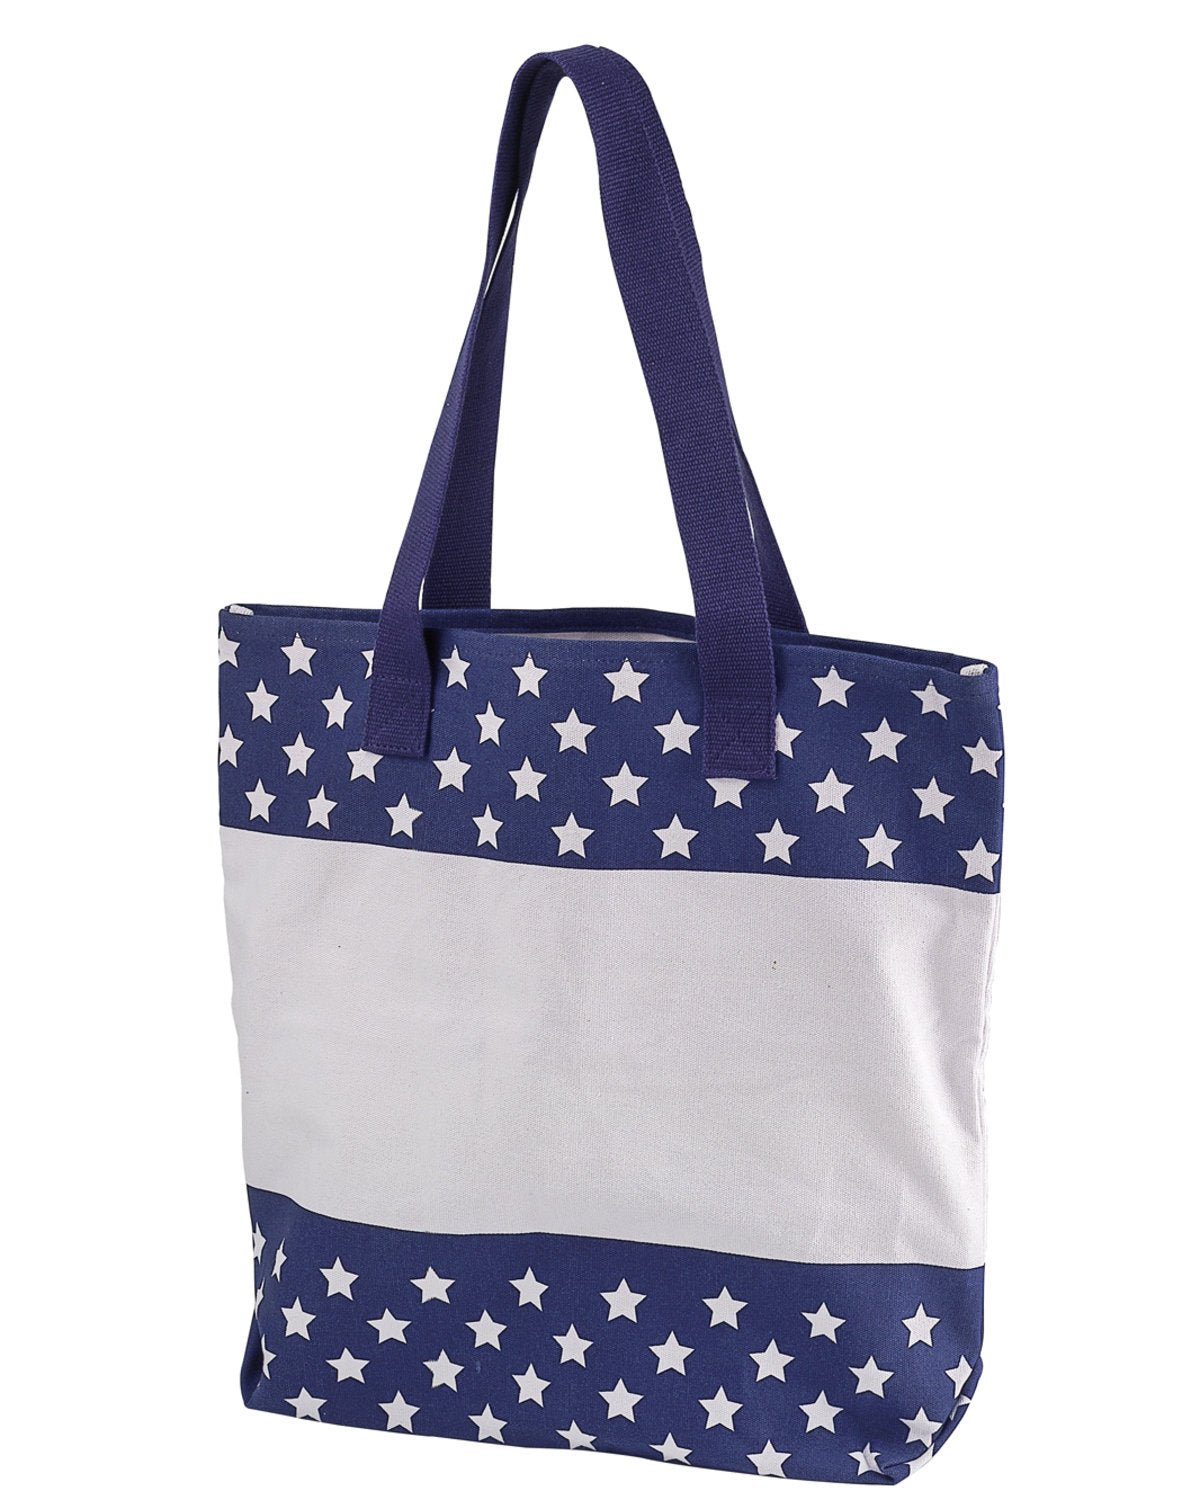 BE066-BAGedge-STARS-BAGedge-Bags and Accessories-1